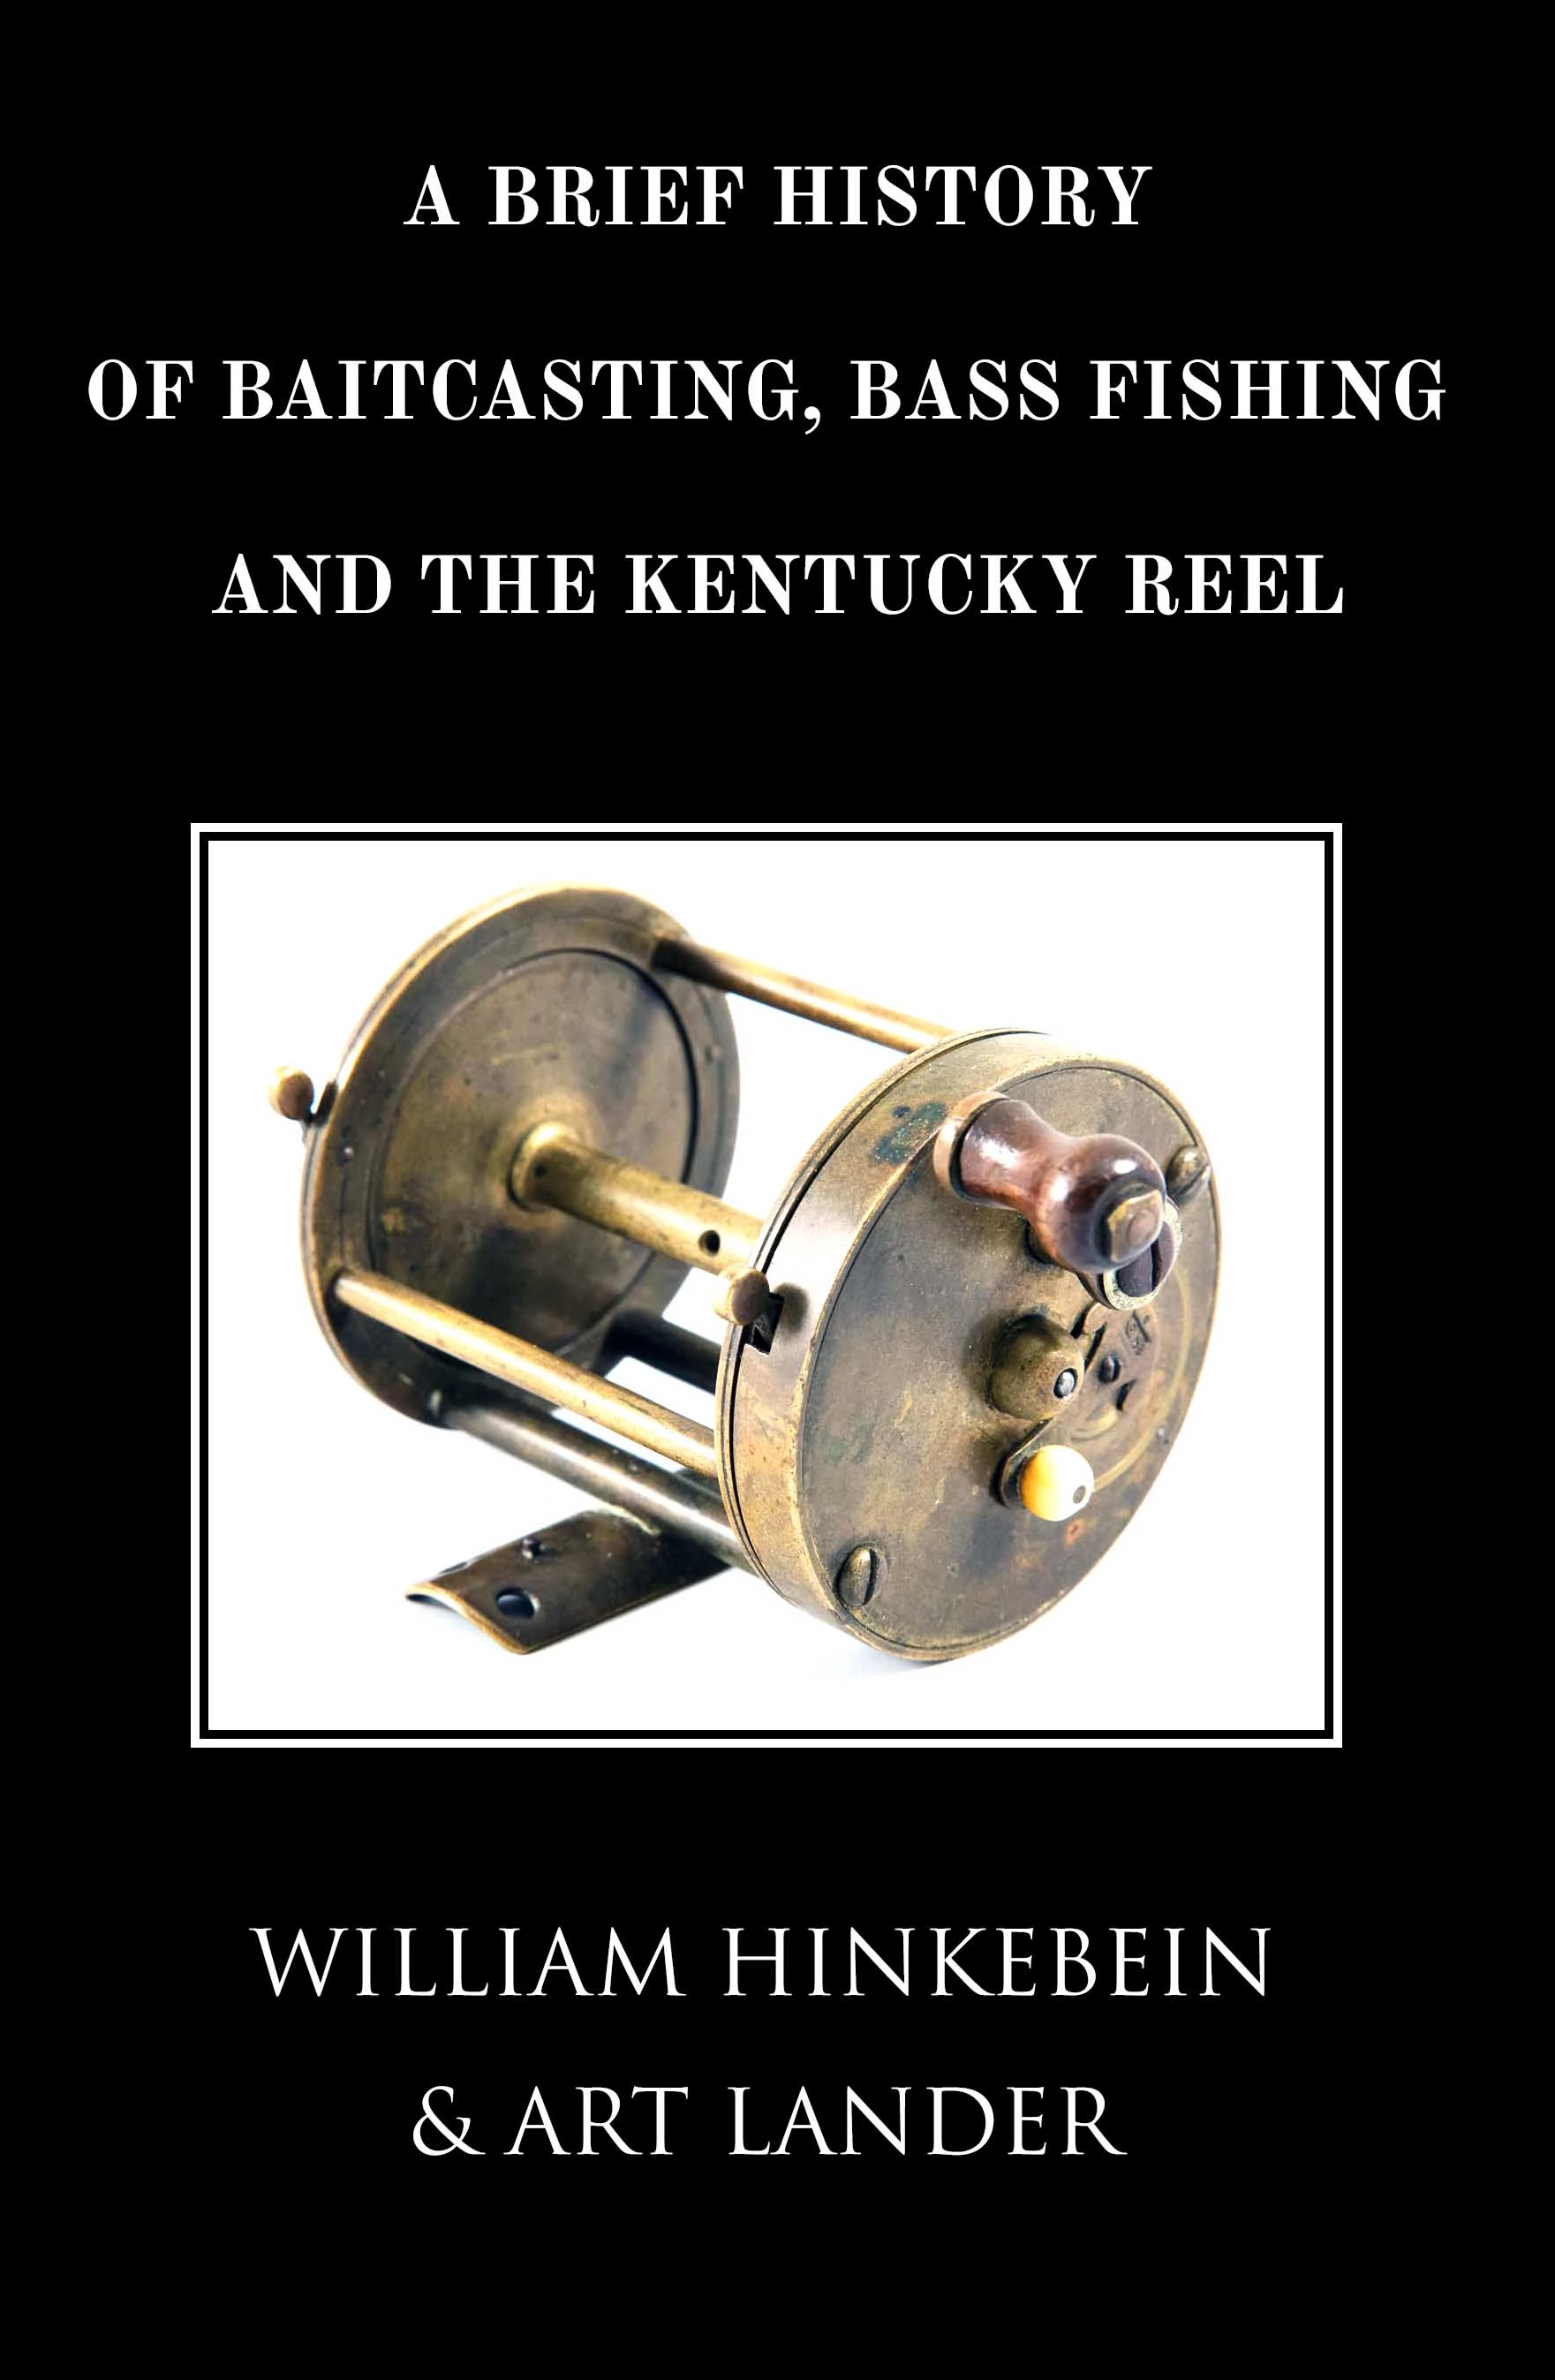 A Brief History of Baitcasting Bass Fishing & the Kentucky Reel